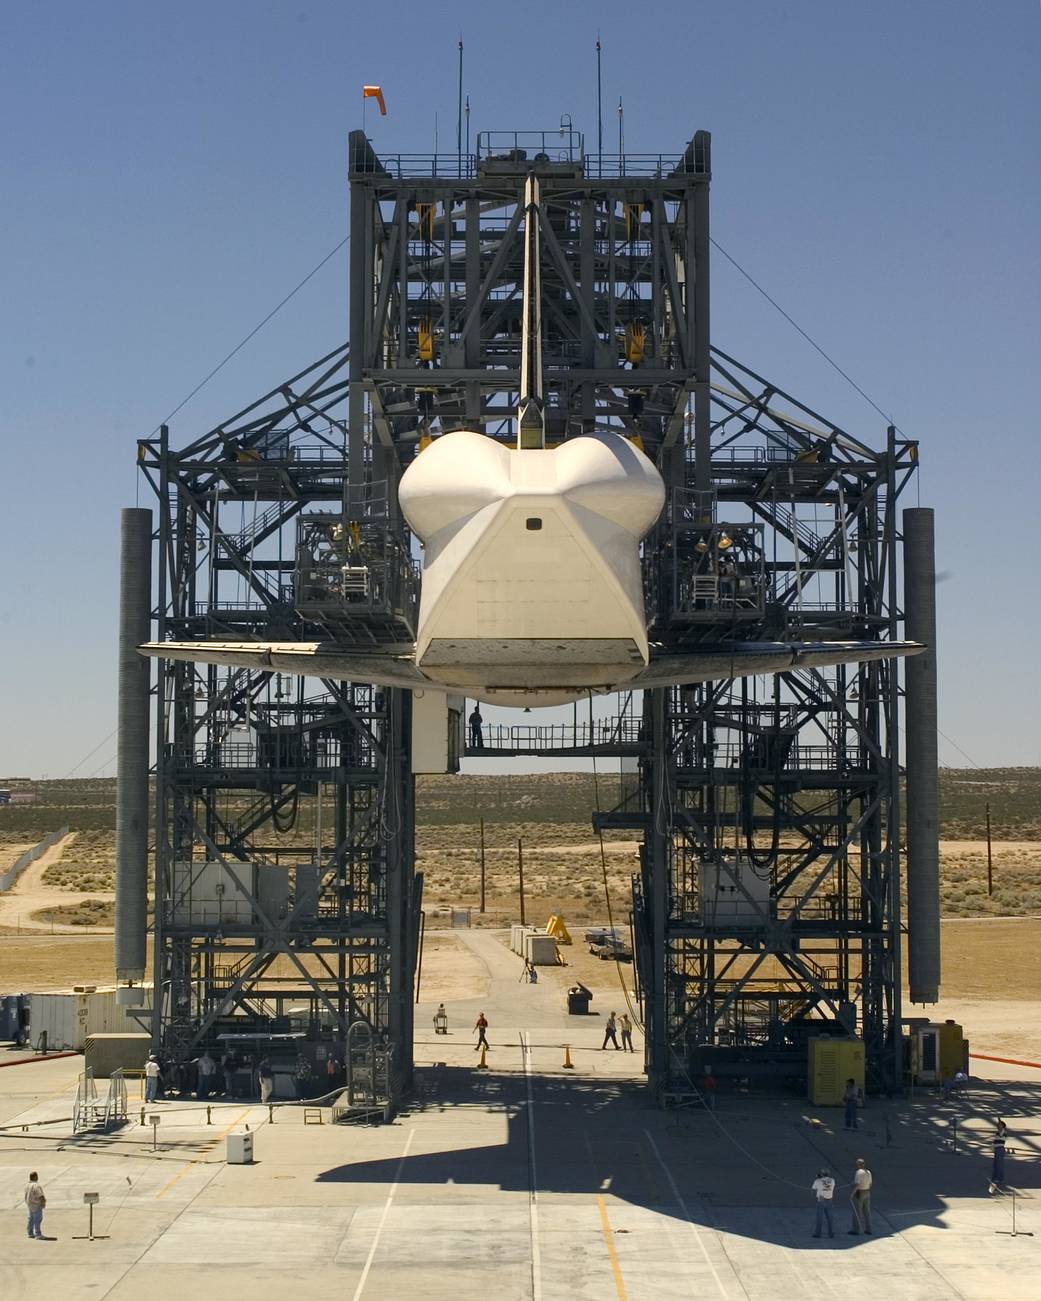 STS-114 Shuttle Discovery is Raised for the 747 Shuttle Carrier Aircraft to Position Itself Underneath